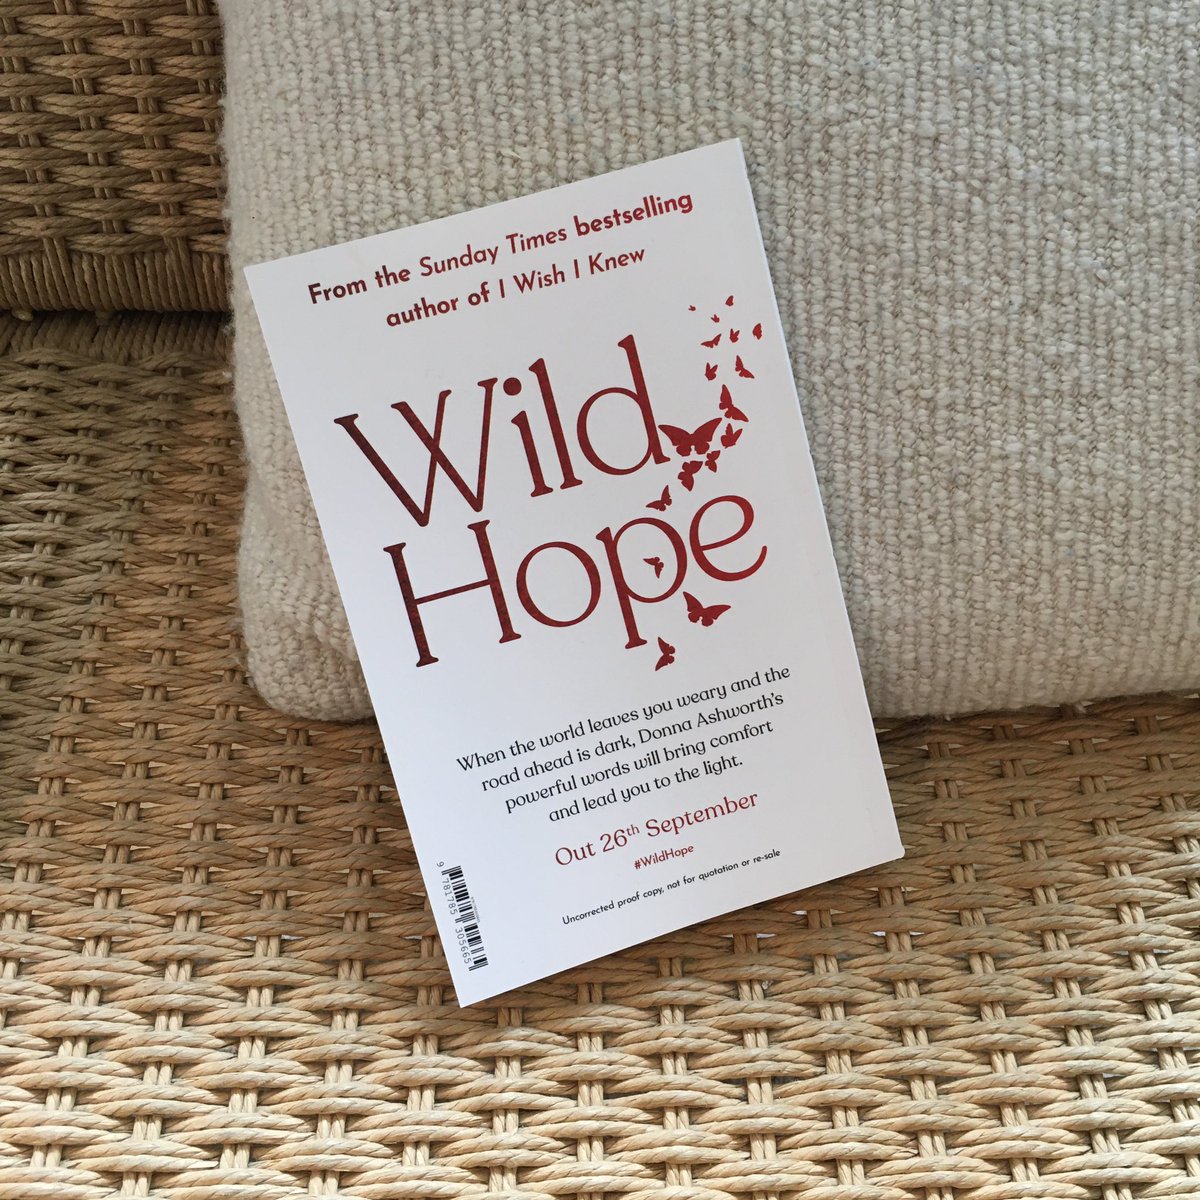 📖#Giveaway📖

#WildHope by @Donna_ashworth is published in hardback (and eBook) on Tuesday 26 September and you can win one of 10 proof copies in #TheBookload on Facebook!

Closes tonight (Wednesday 9 August) at 10pm. UK addresses only.

Enter here: facebook.com/groups/thebook…